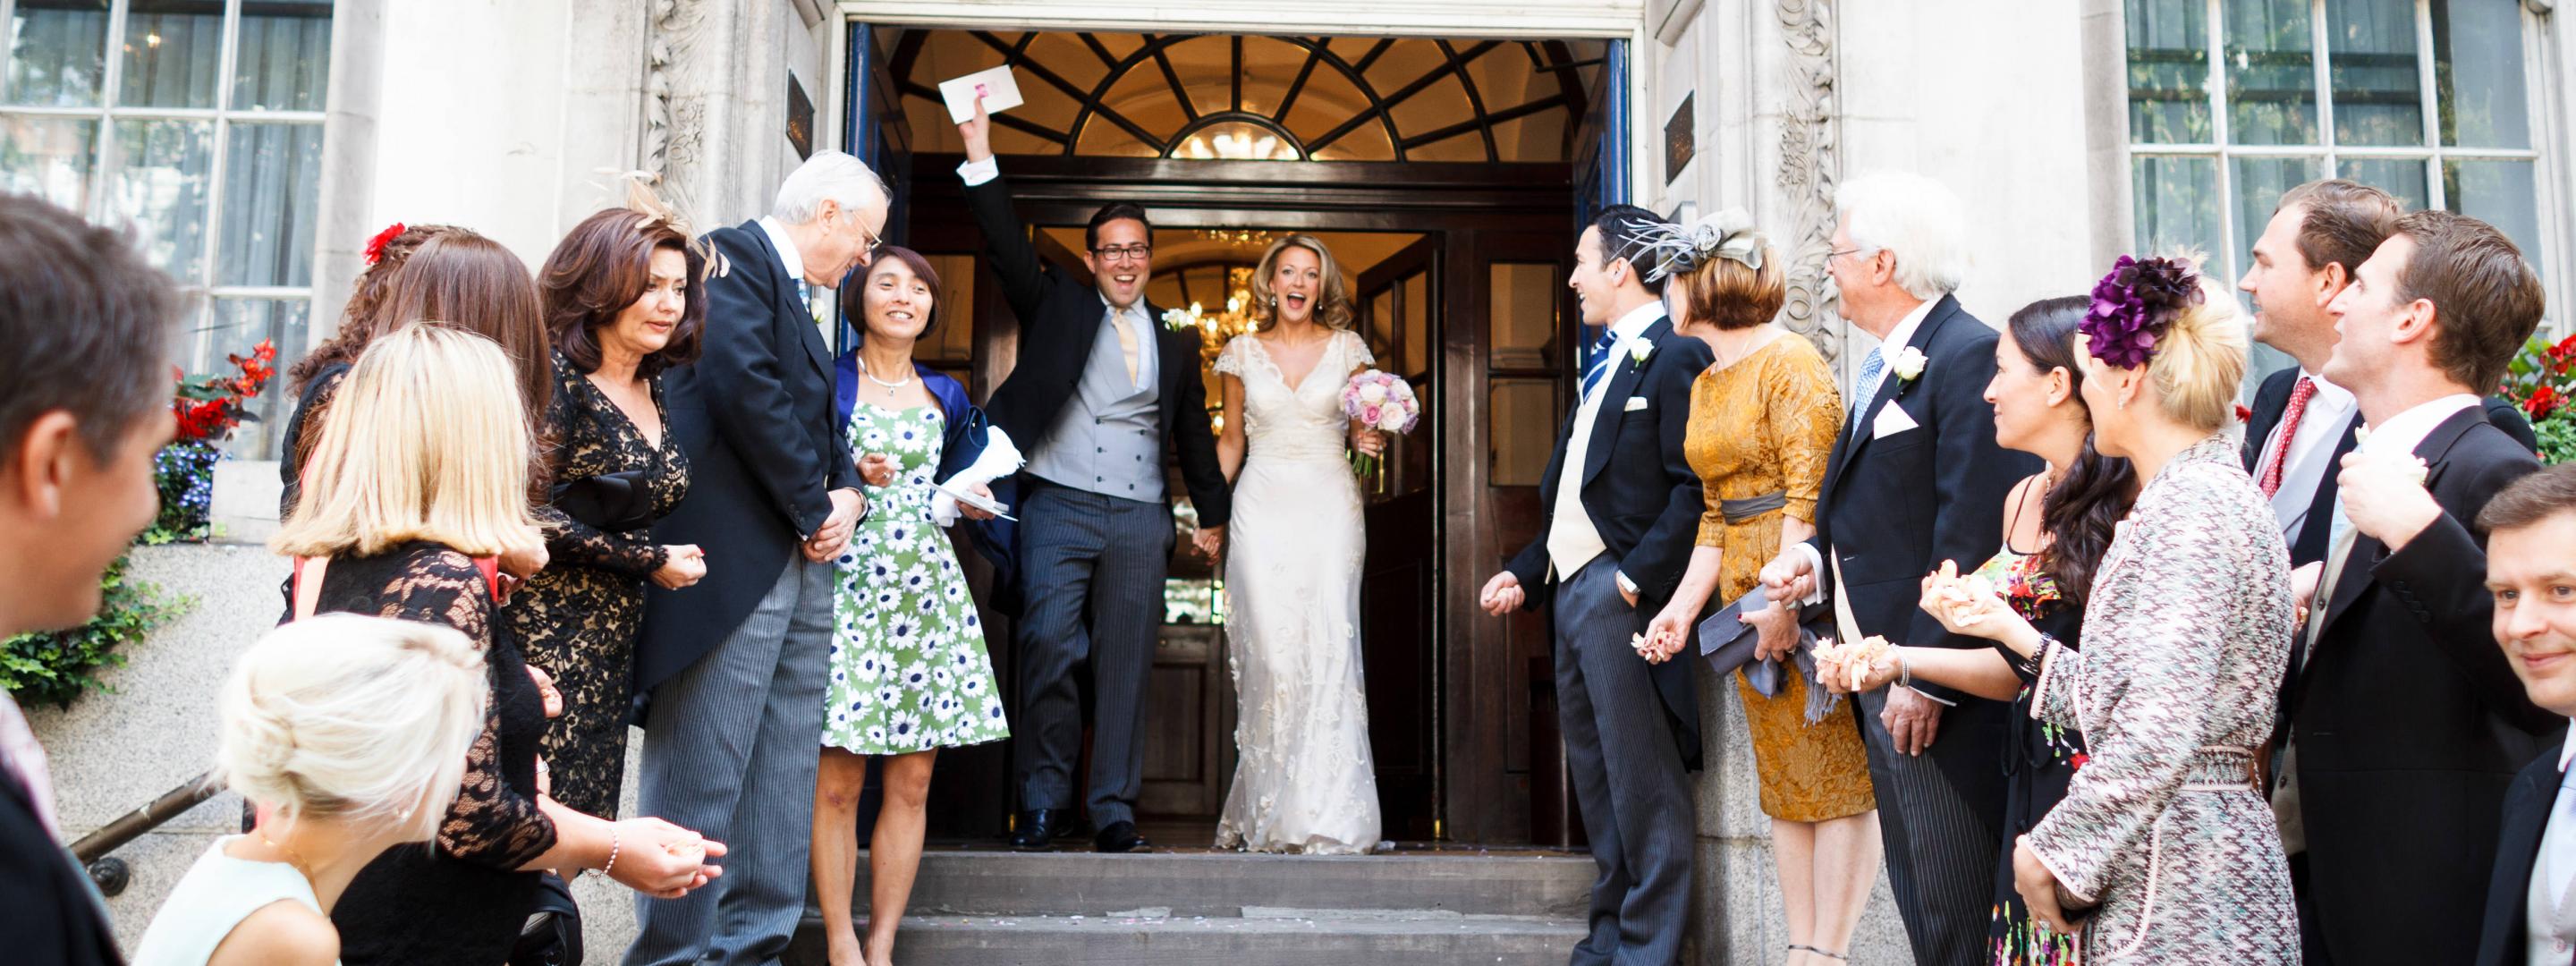 Married couple coming out of building with guests on either side